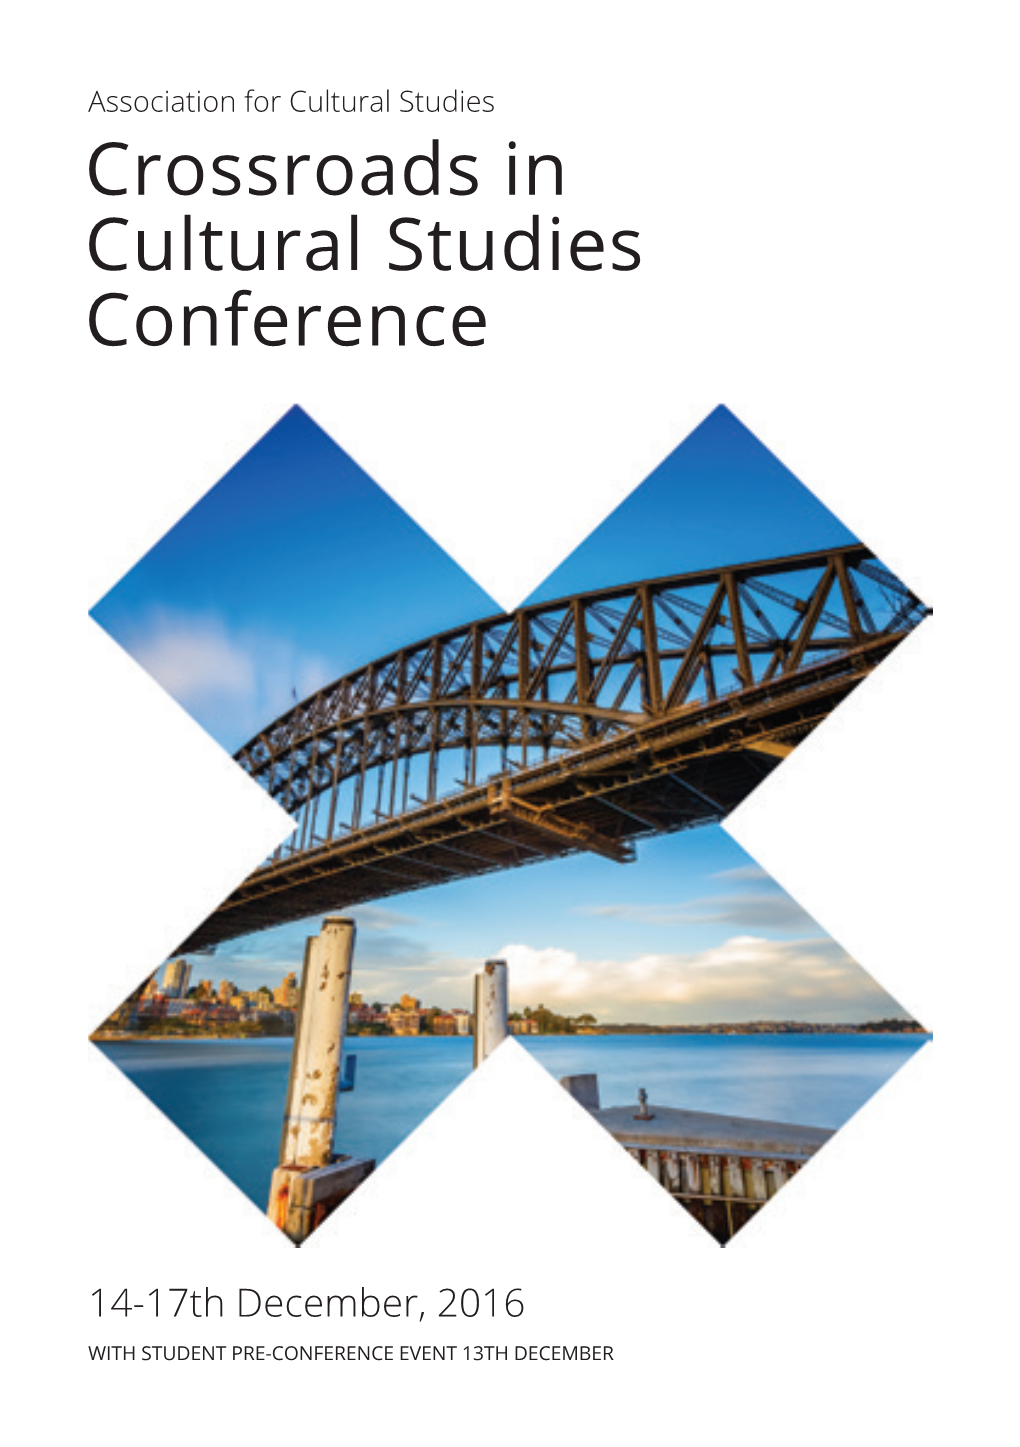 Crossroads in Cultural Studies Conference